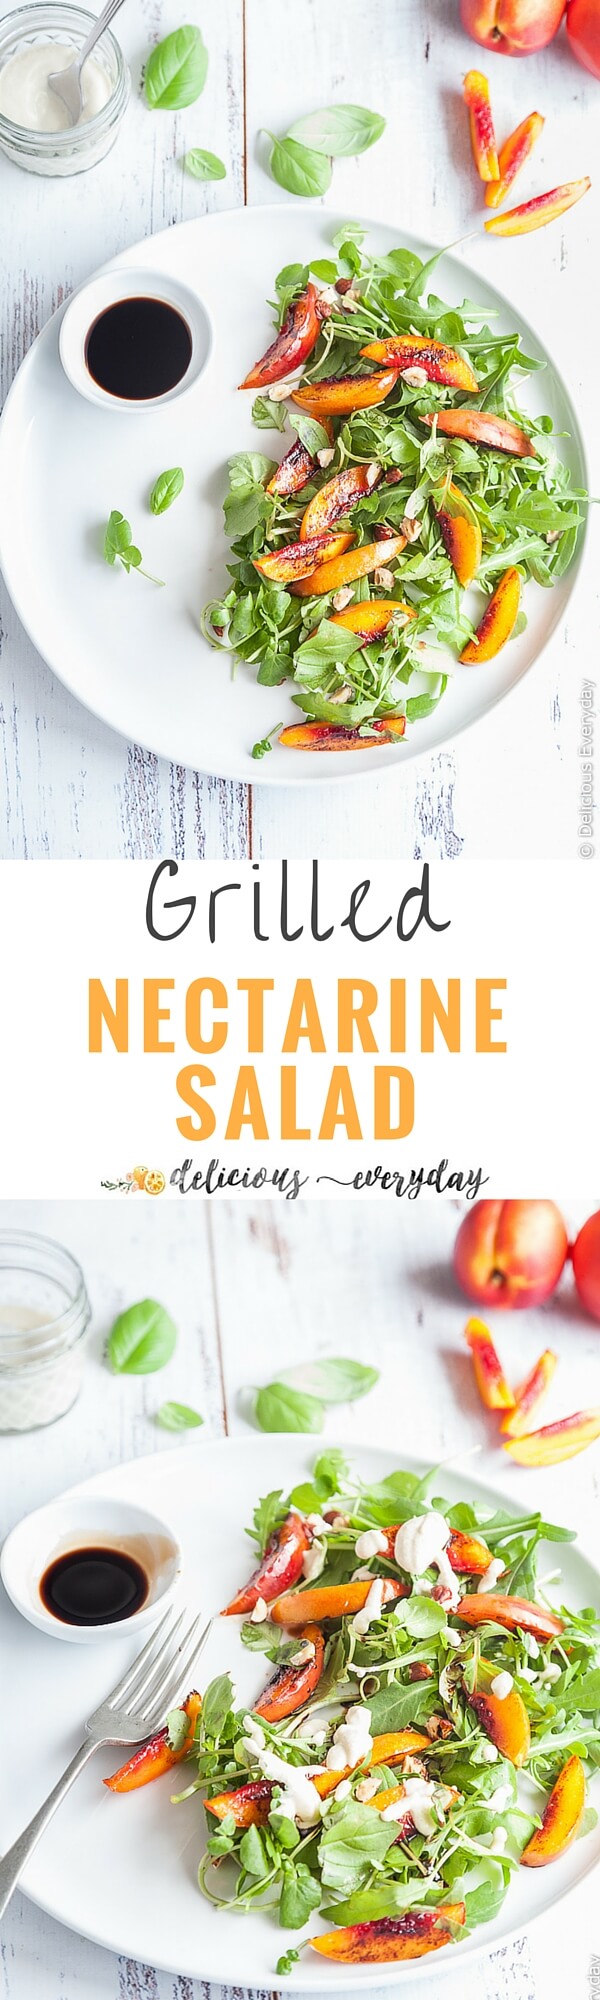 Vegan Grilled Nectarine Salad - A gorgeously simple salad with the sweetness of nectarines. Serve it as a side dish or for a light lunch. | Click for the recipe